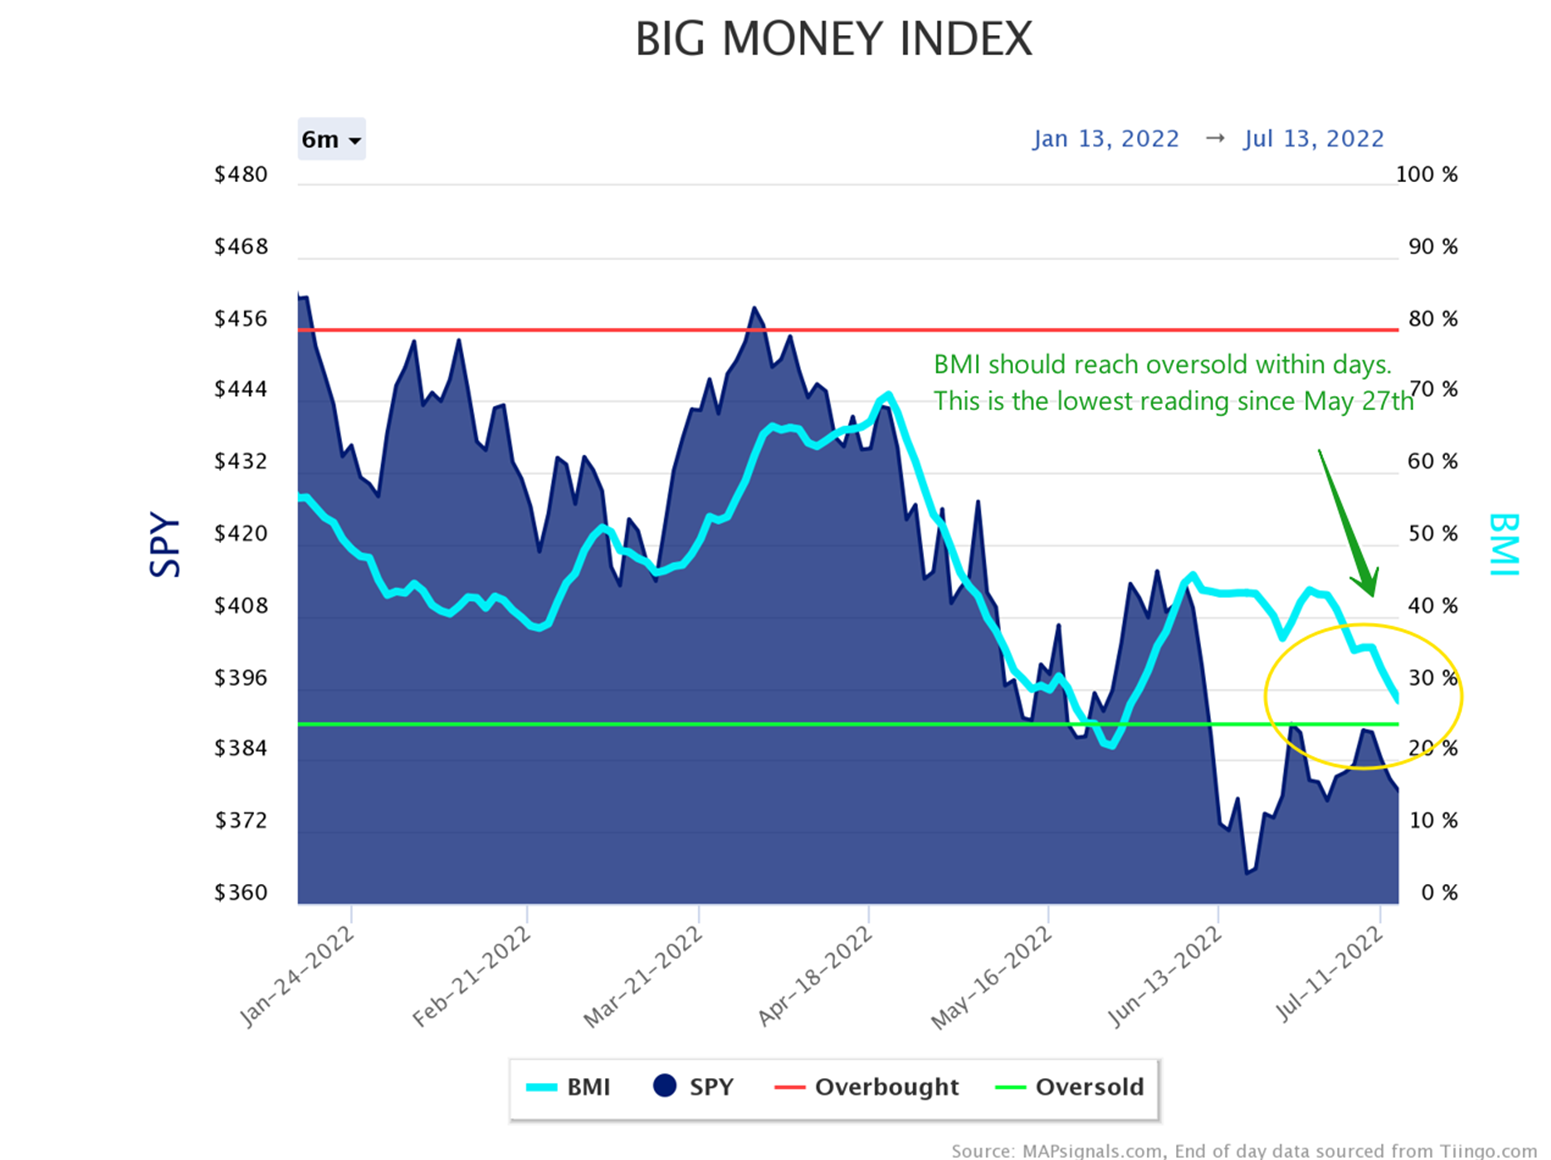 BMI should reach oversold within days | Big Money Index